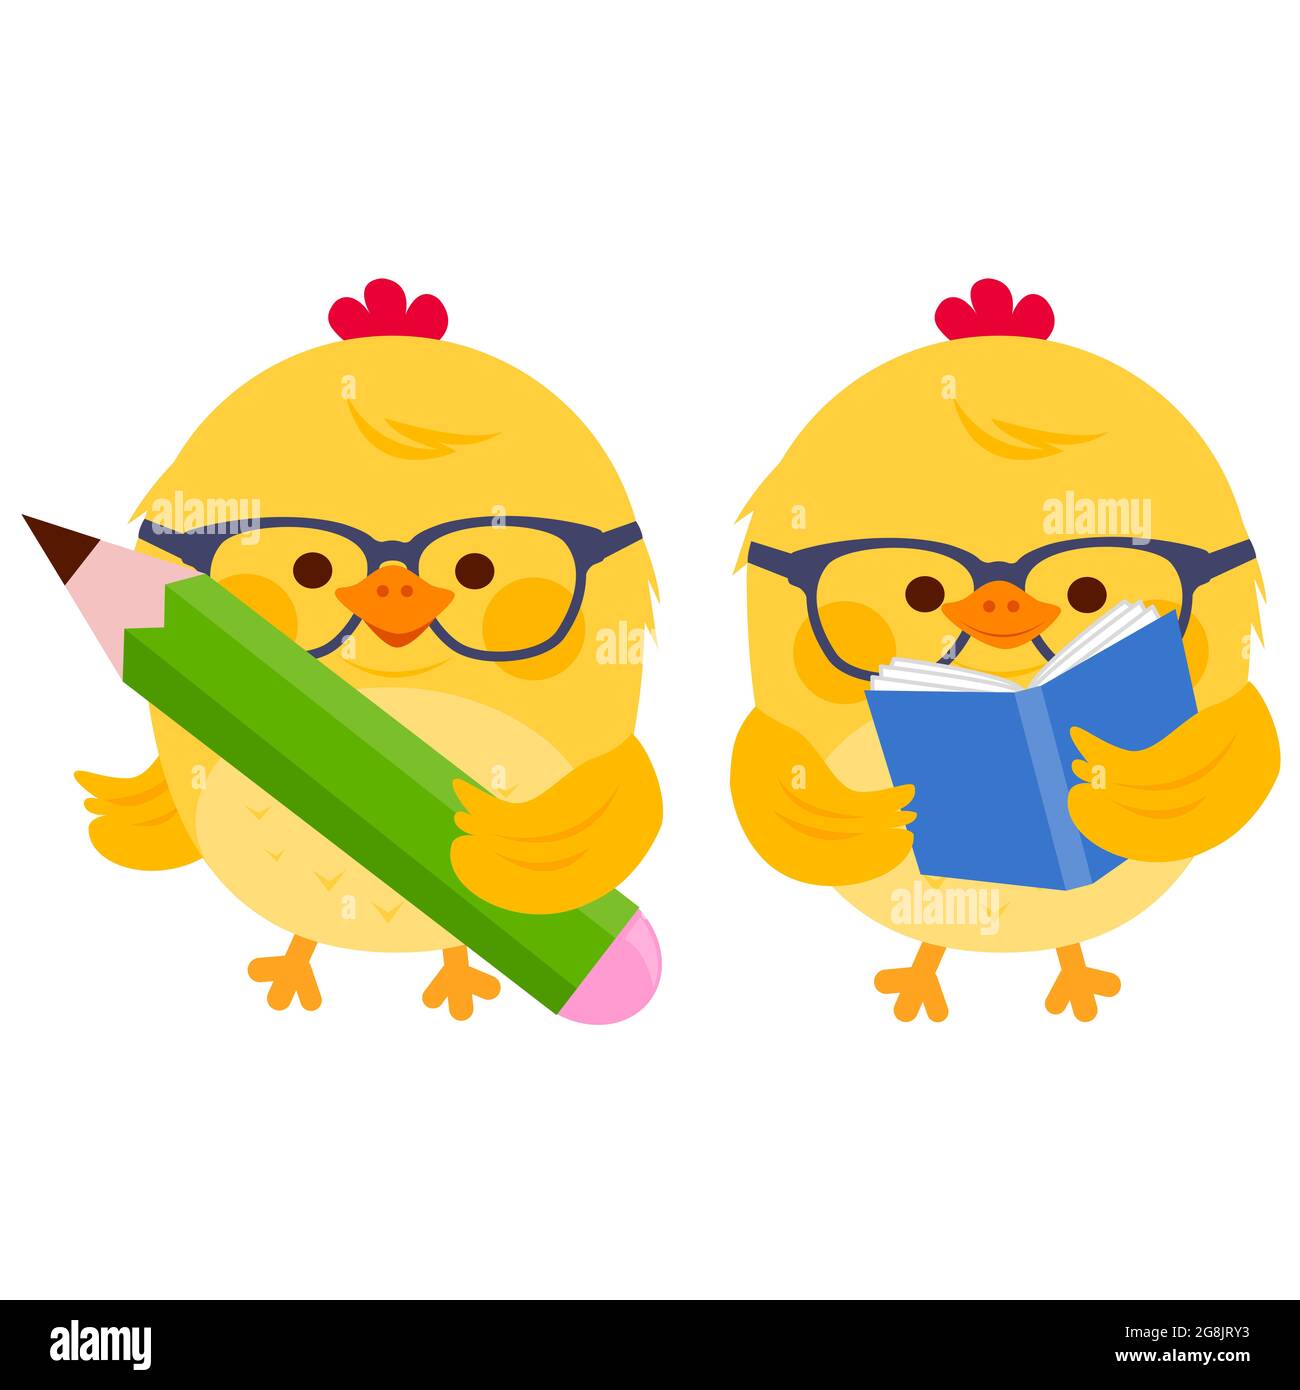 chicken little book characters